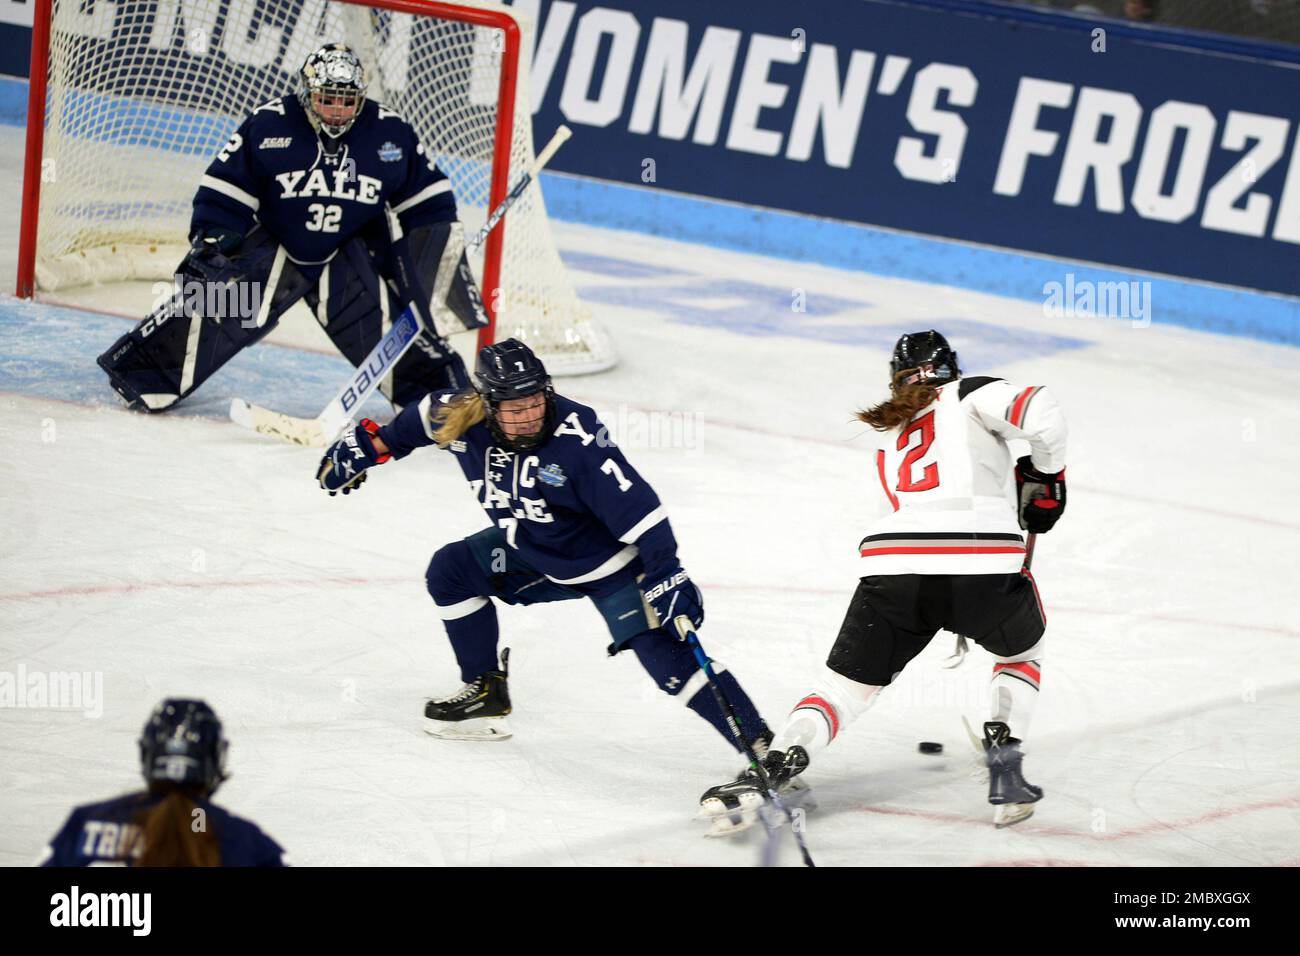 Ohio State's Jennifer Gardiner (12) attempts to get around Yale's Greta  Skarzynski (7) to take a shot on Yale goalie Gianna Meloni (32) during the  second period of an NCAA college women's